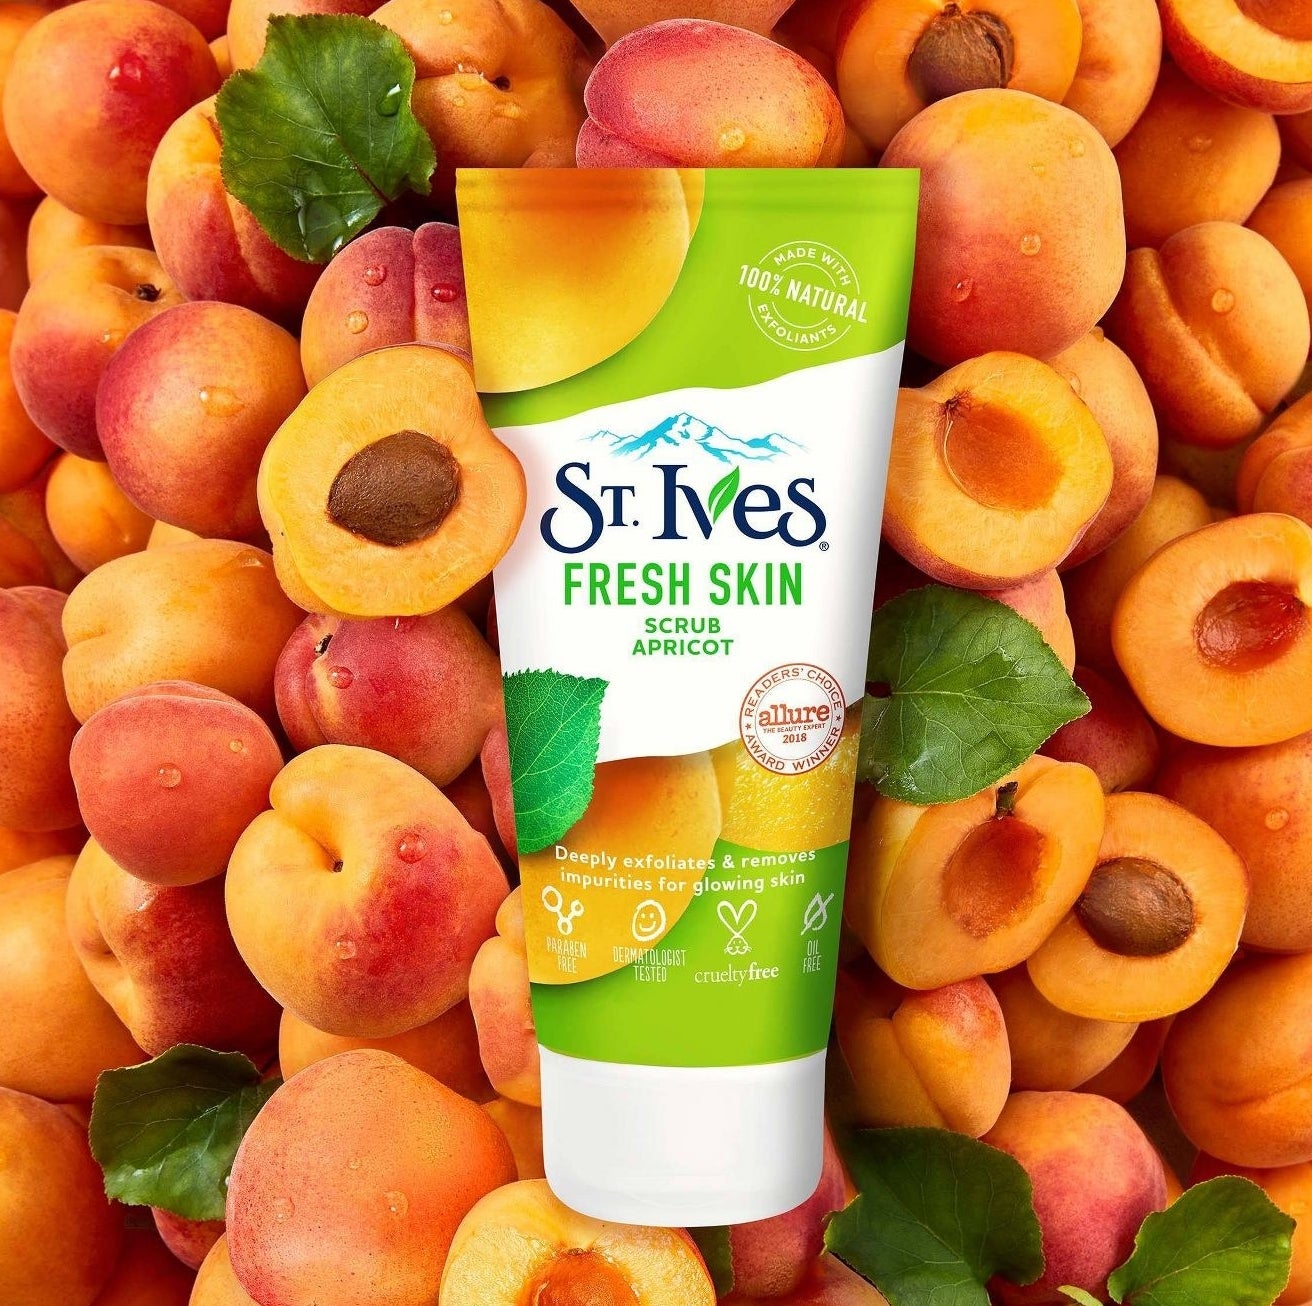 The St. Ives apricot facial scrub